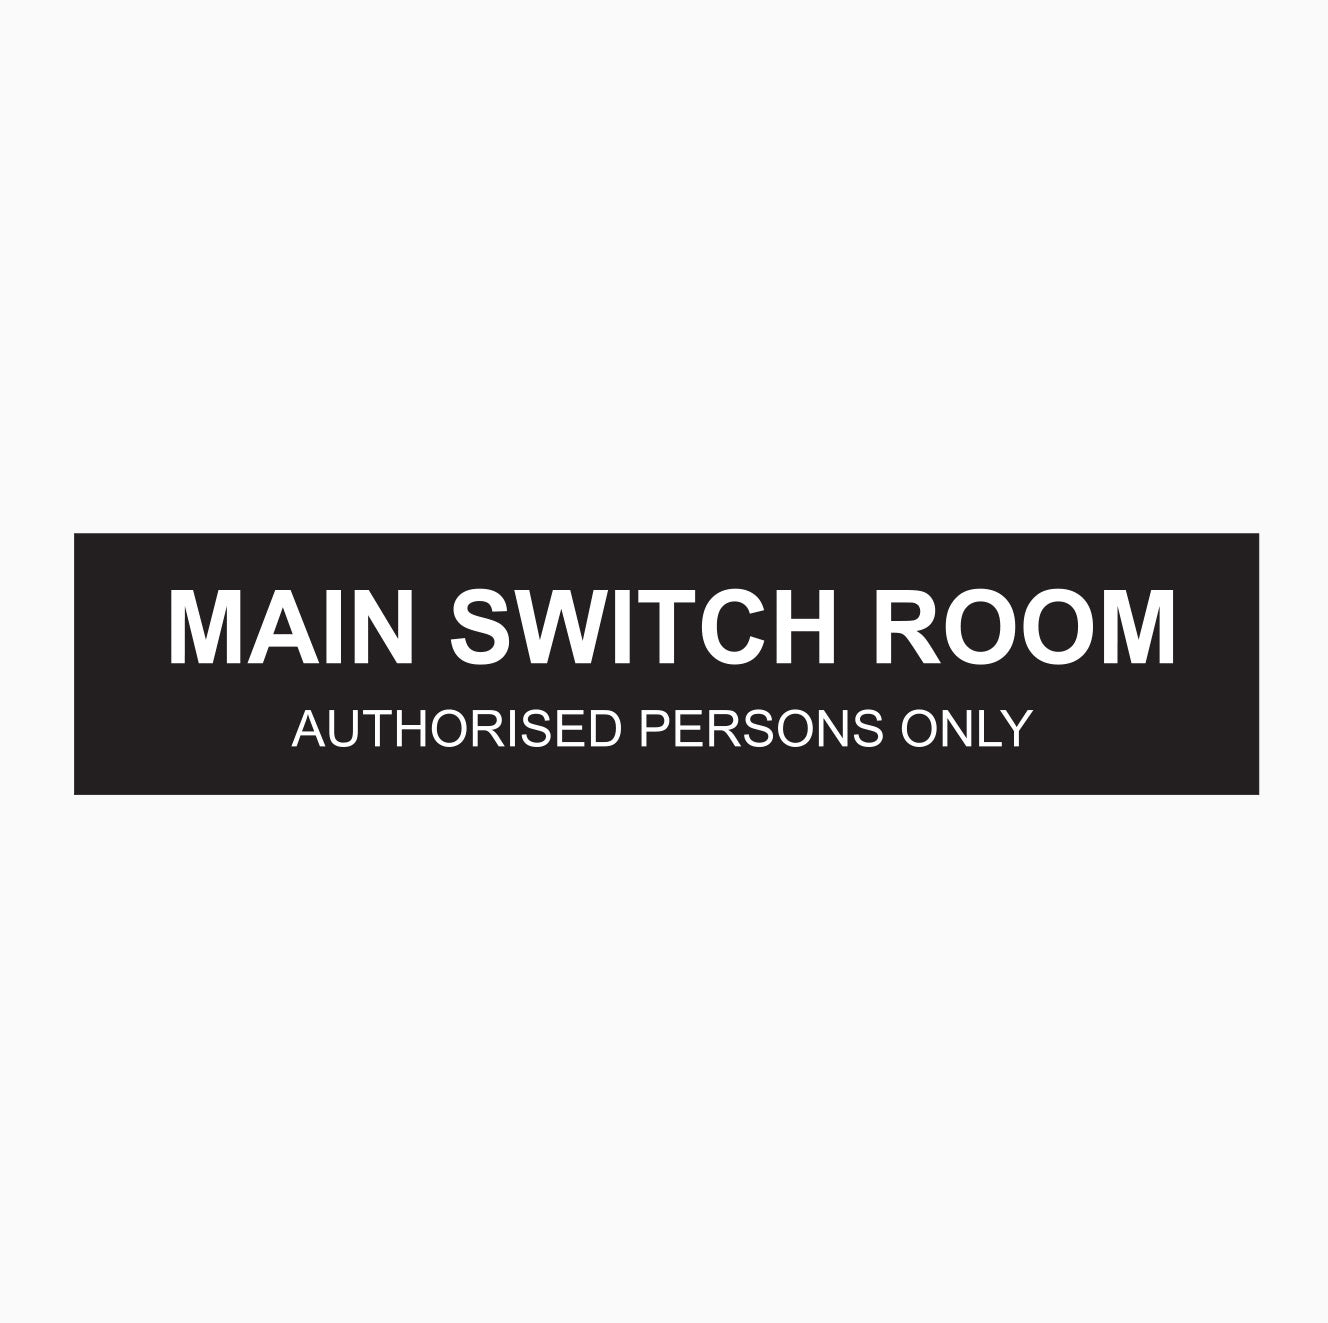 MAIN SWITCH ROOM SIGN - AUTHORISED PERSONS ONLY SIGN